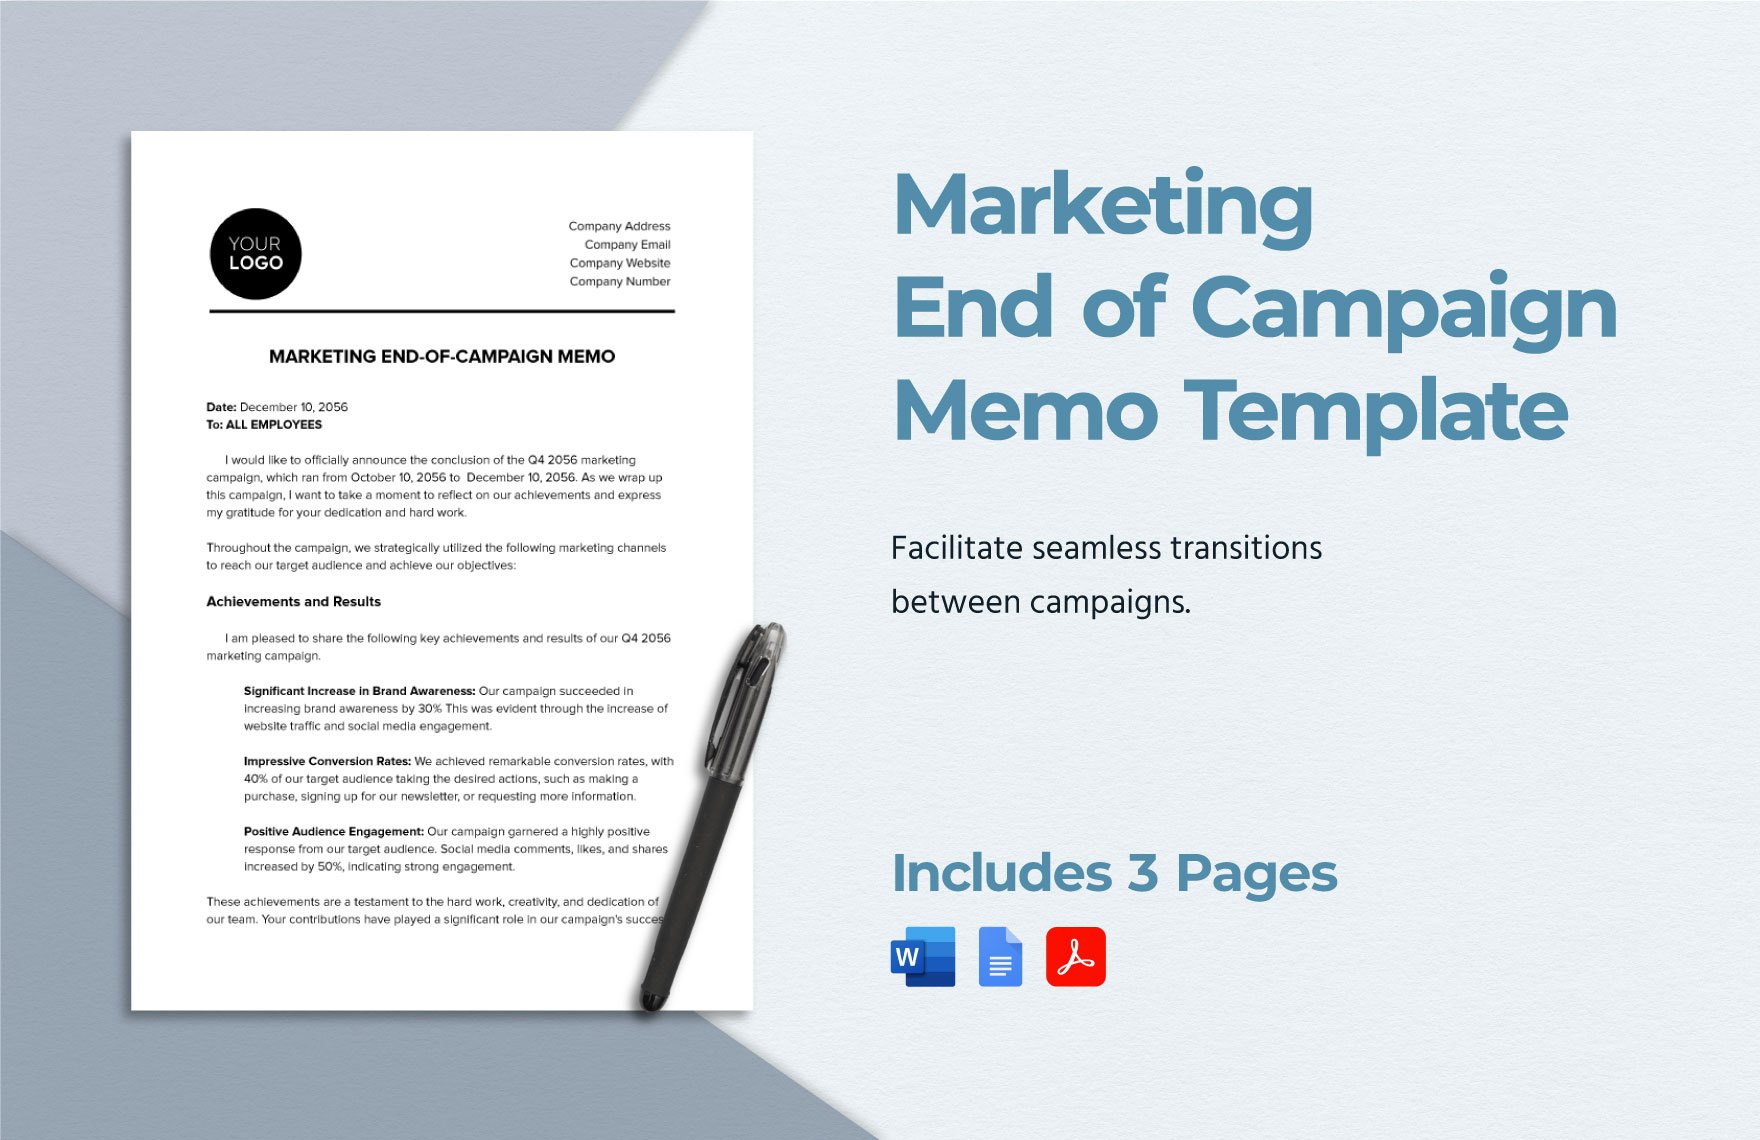 Marketing End of Campaign Memo Template